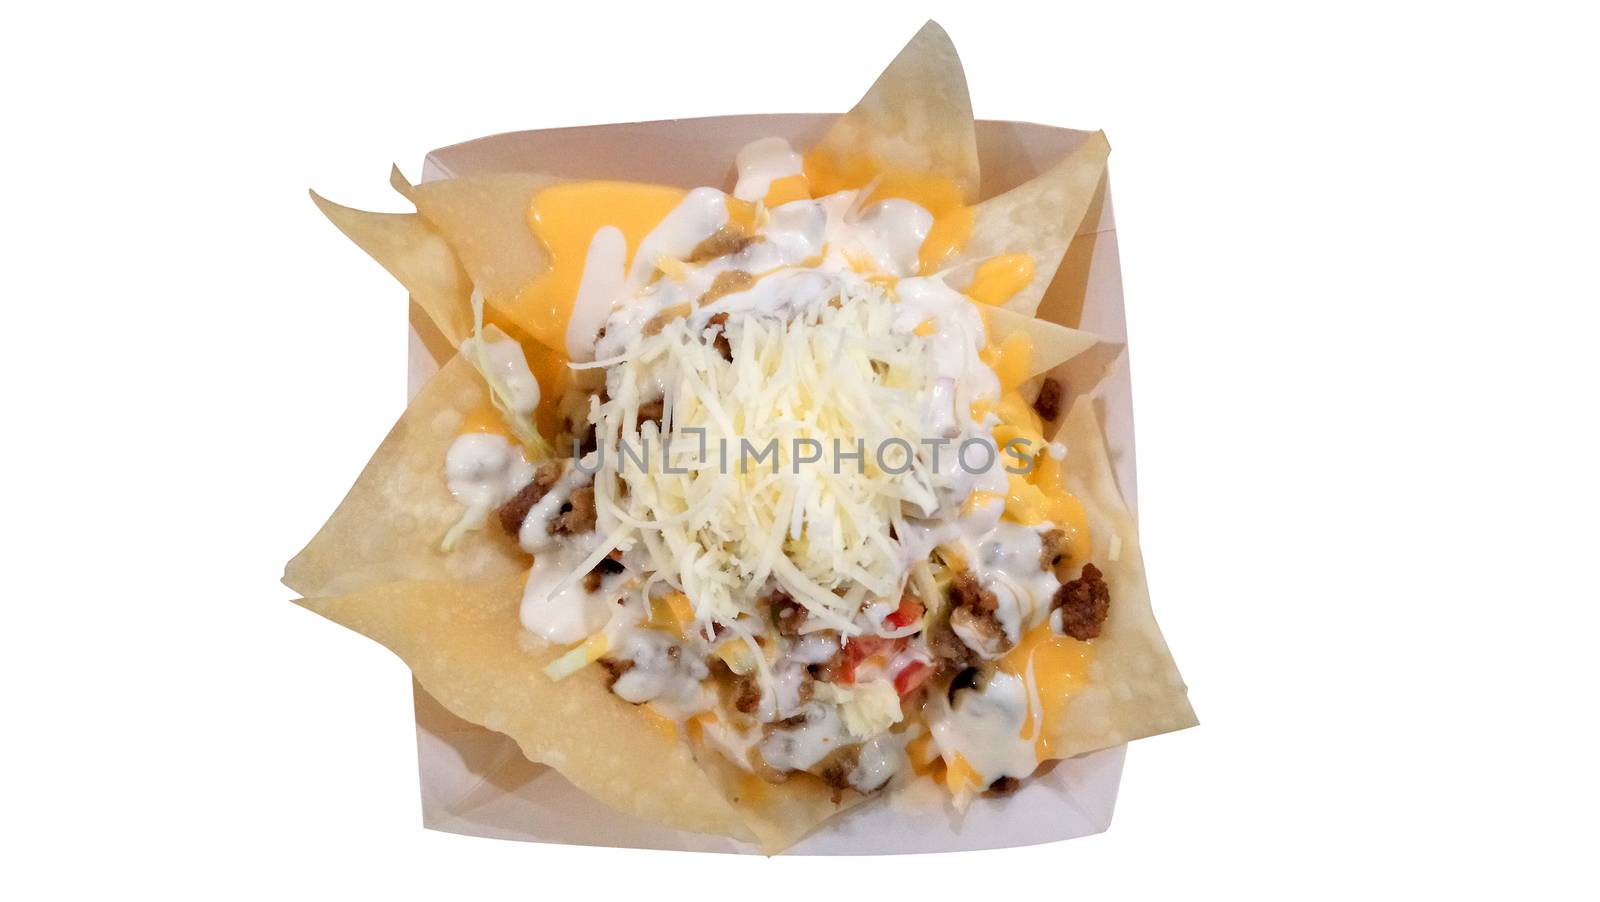 Nacho taco chips with ground beef, cheese, sauce, and tomatoes by imwaltersy